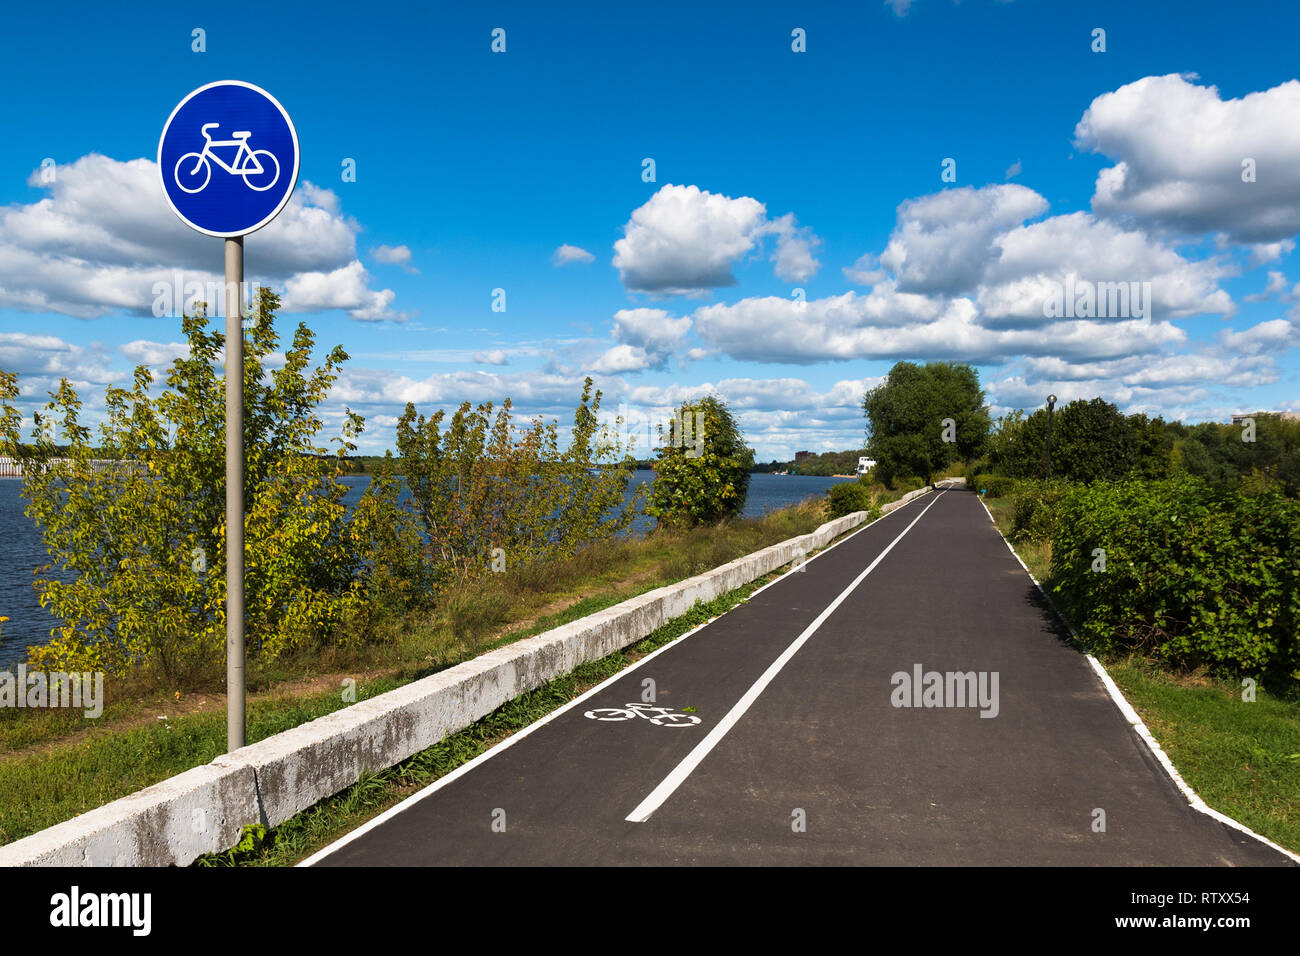 Bicycle road on a riverwalk along the Volga River in the city of Dubna, Moscow Oblast, Russia. Stock Photo